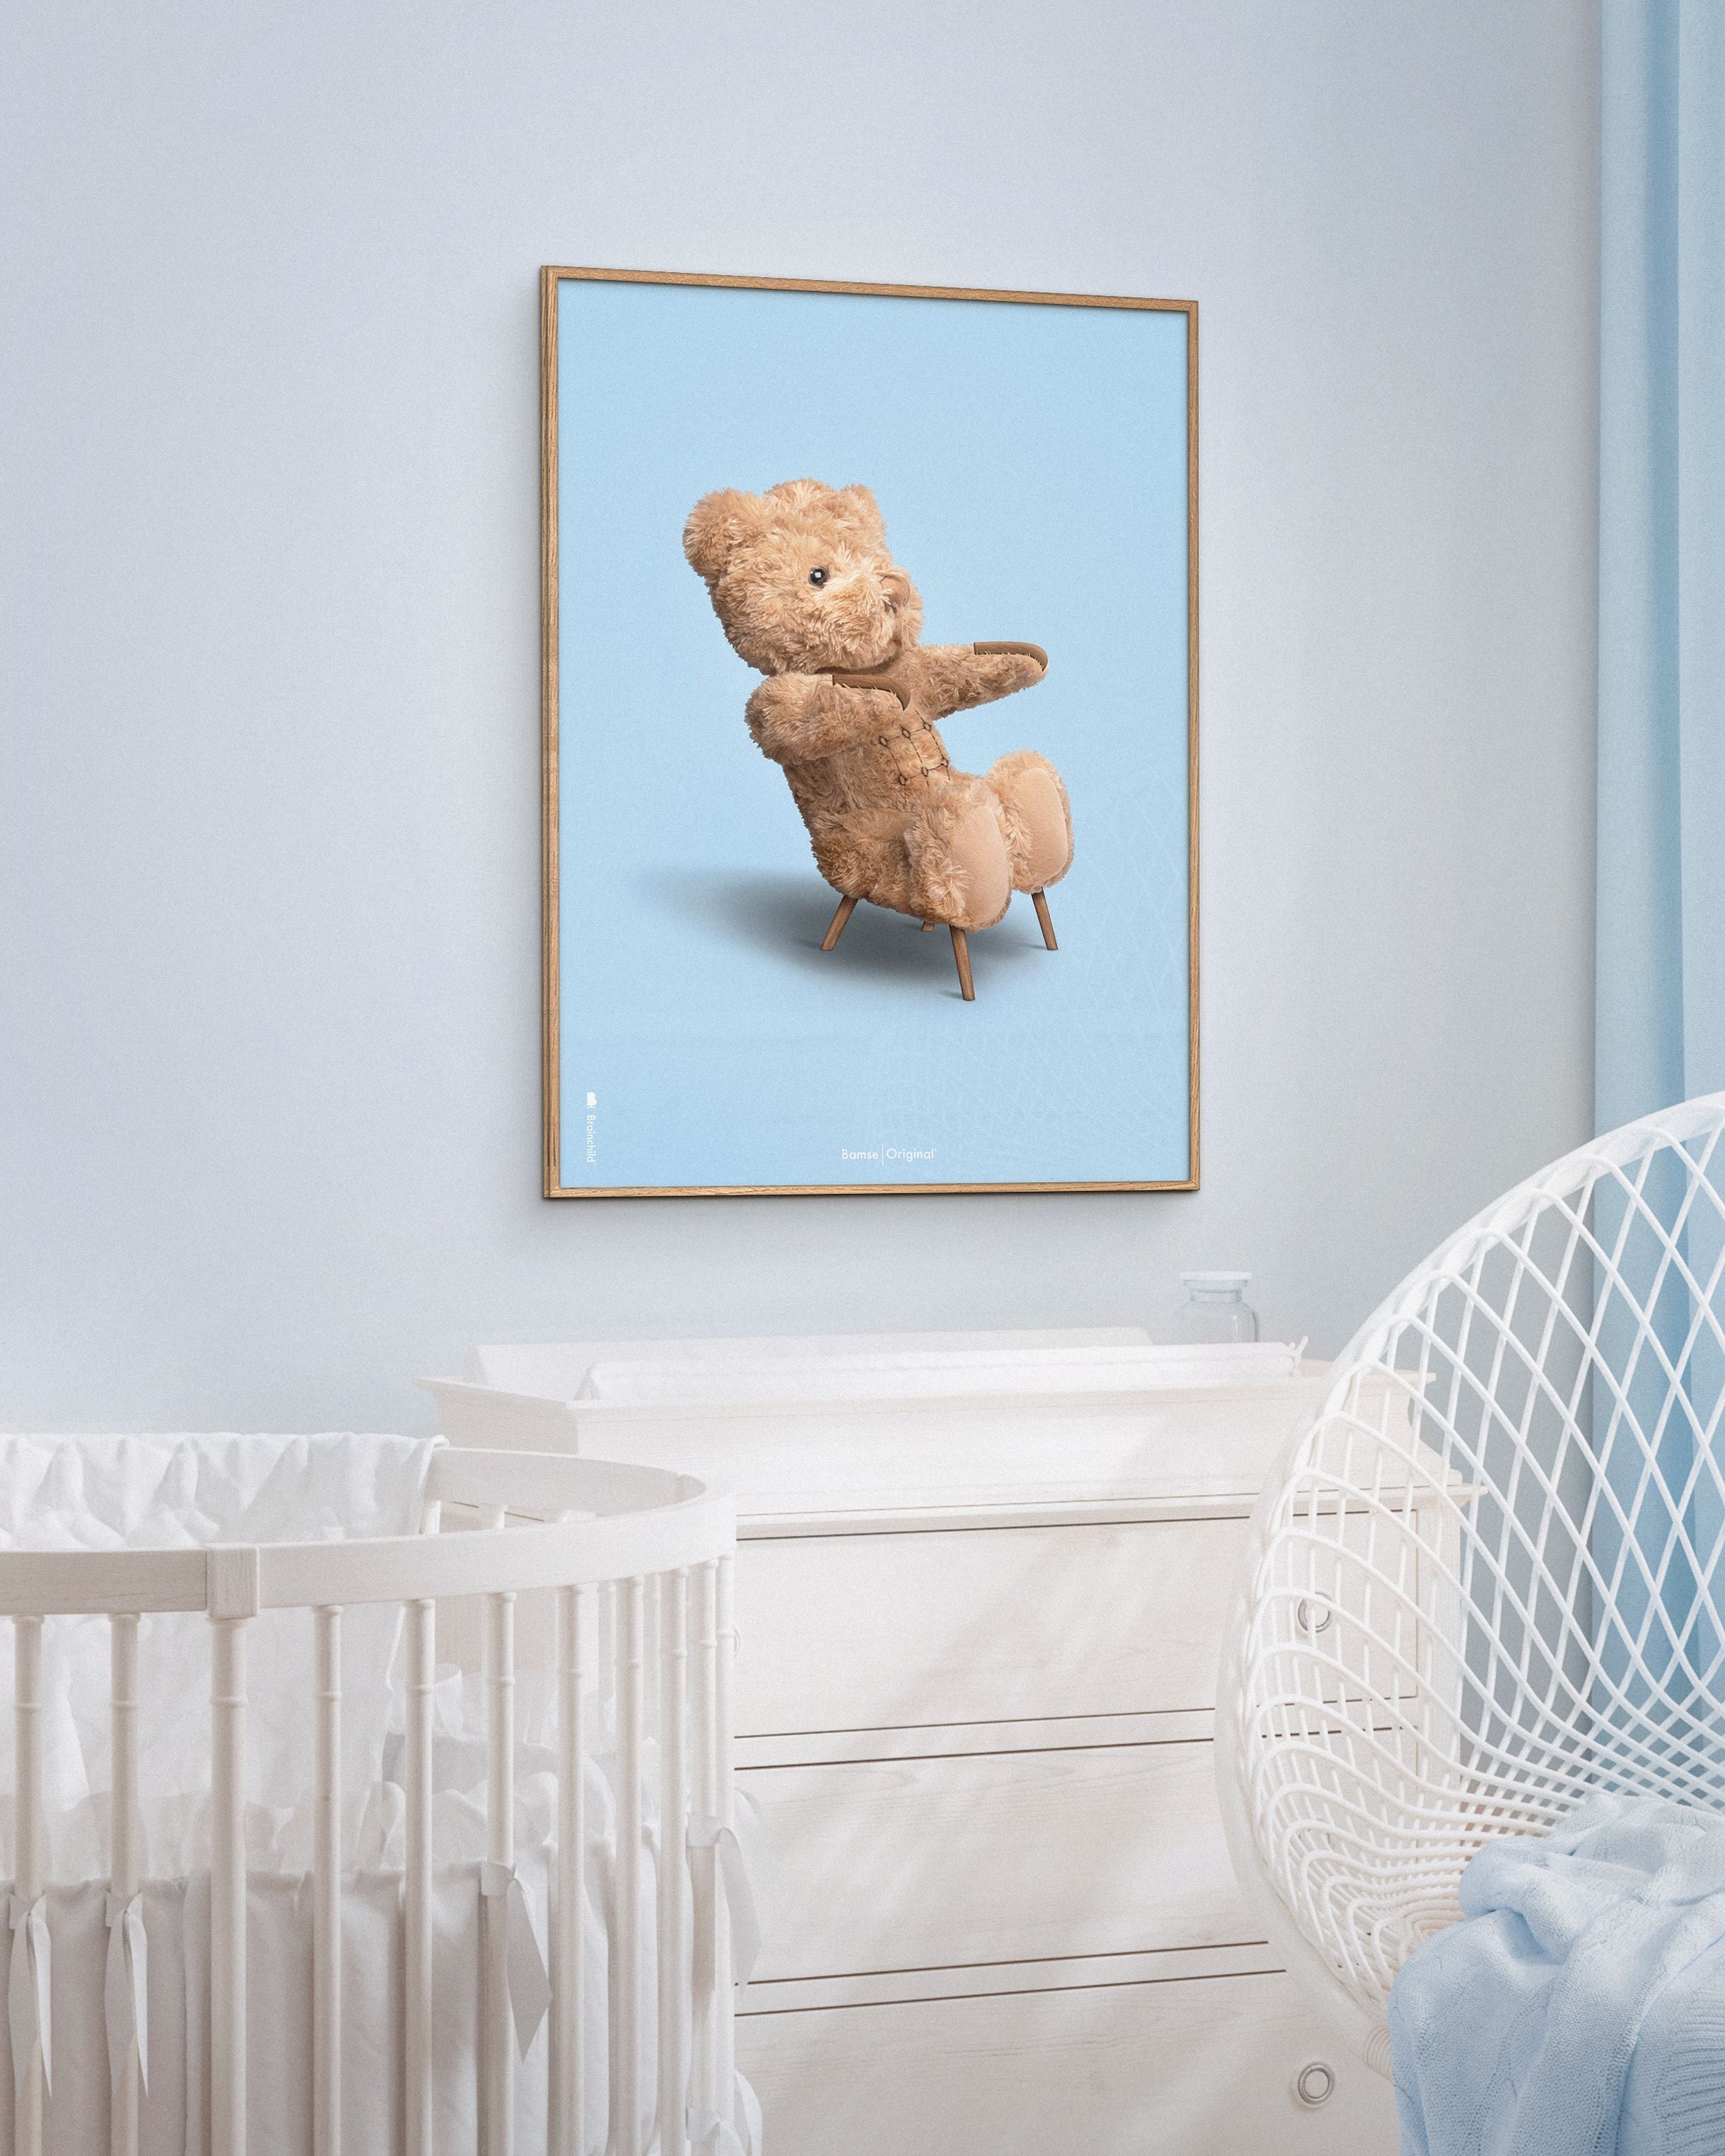 Brainchild Teddy Bear Classic Poster Frame Made Of Black Lacquered Wood 50x70 Cm, Light Blue Background